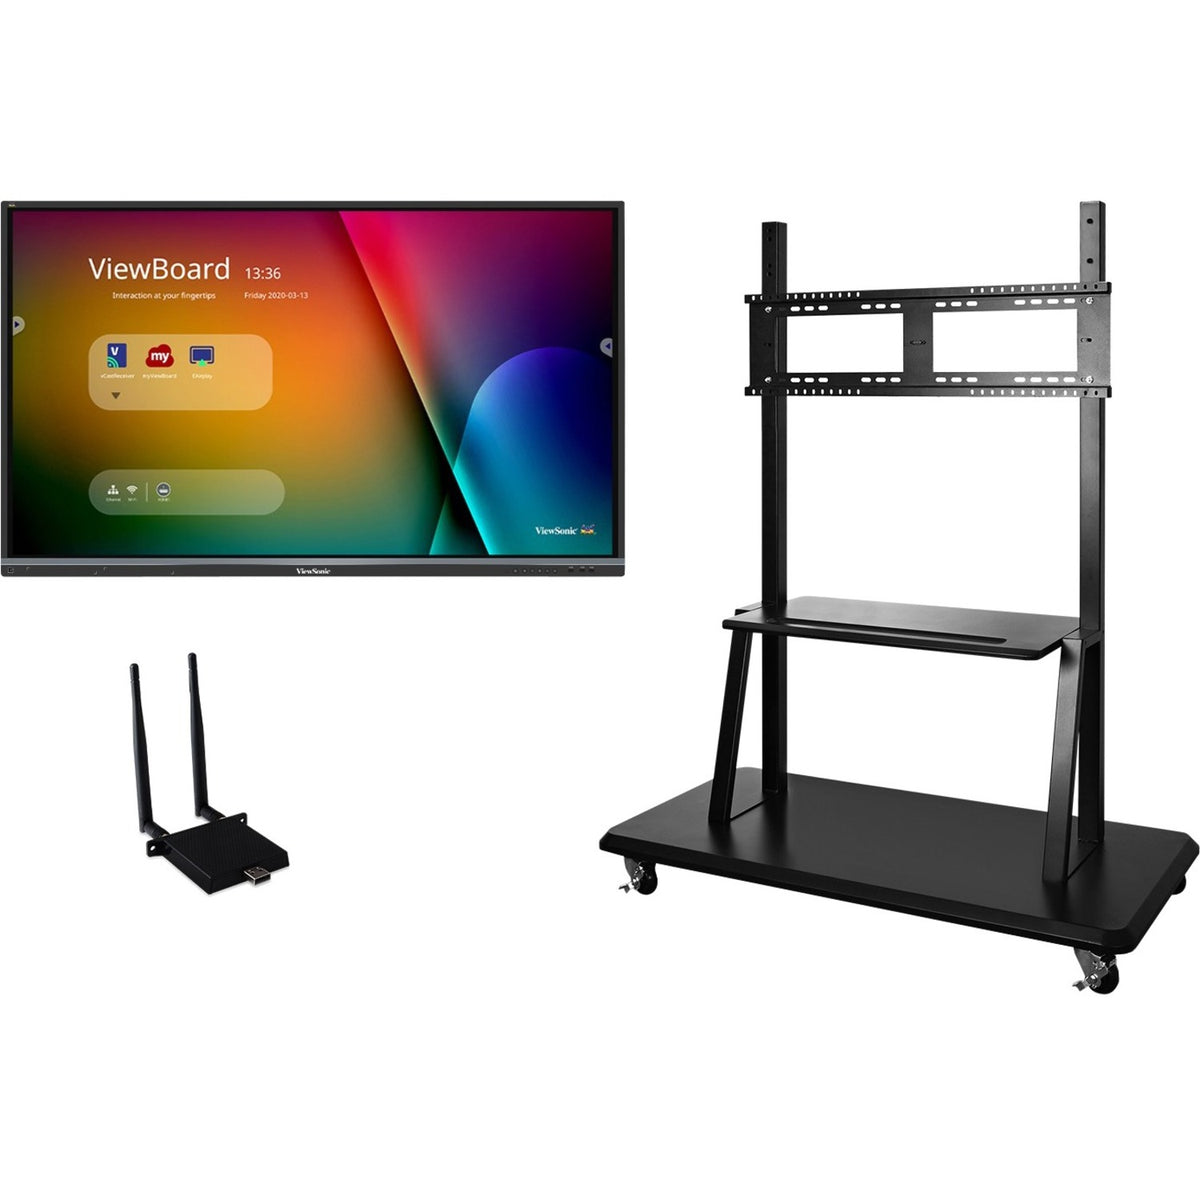 ViewSonic ViewBoard IFP5550-E2 - 4K Interactive Display with WiFi Adapter and Mobile Trolley Cart - 350 cd/m2 - 55" - IFP5550-E2